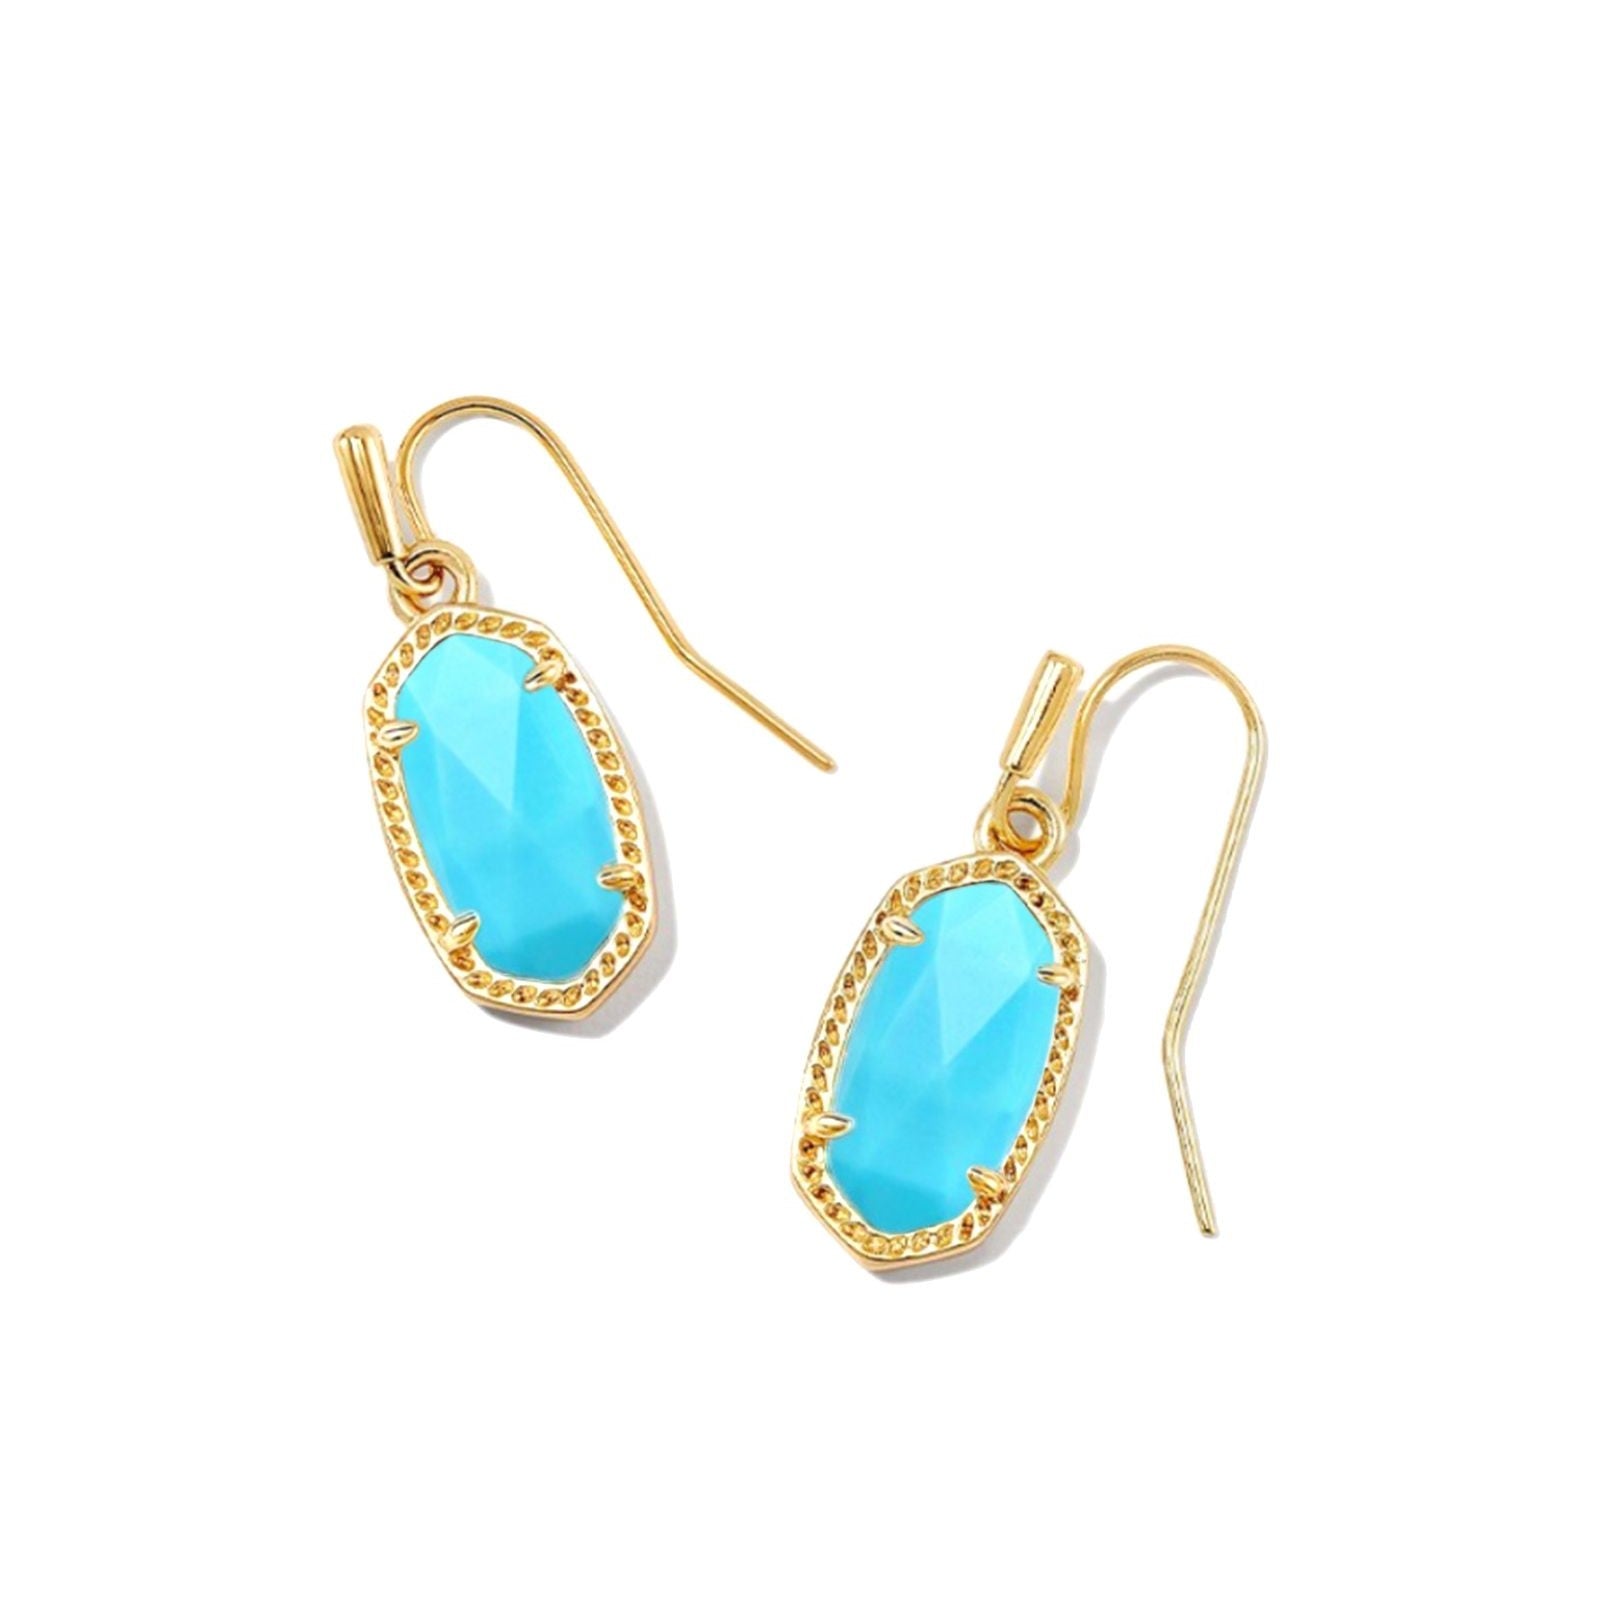 Kendra Scott | Lee Gold Earrings in Variegated Turquoise Magnesite - Giddy Up Glamour Boutique